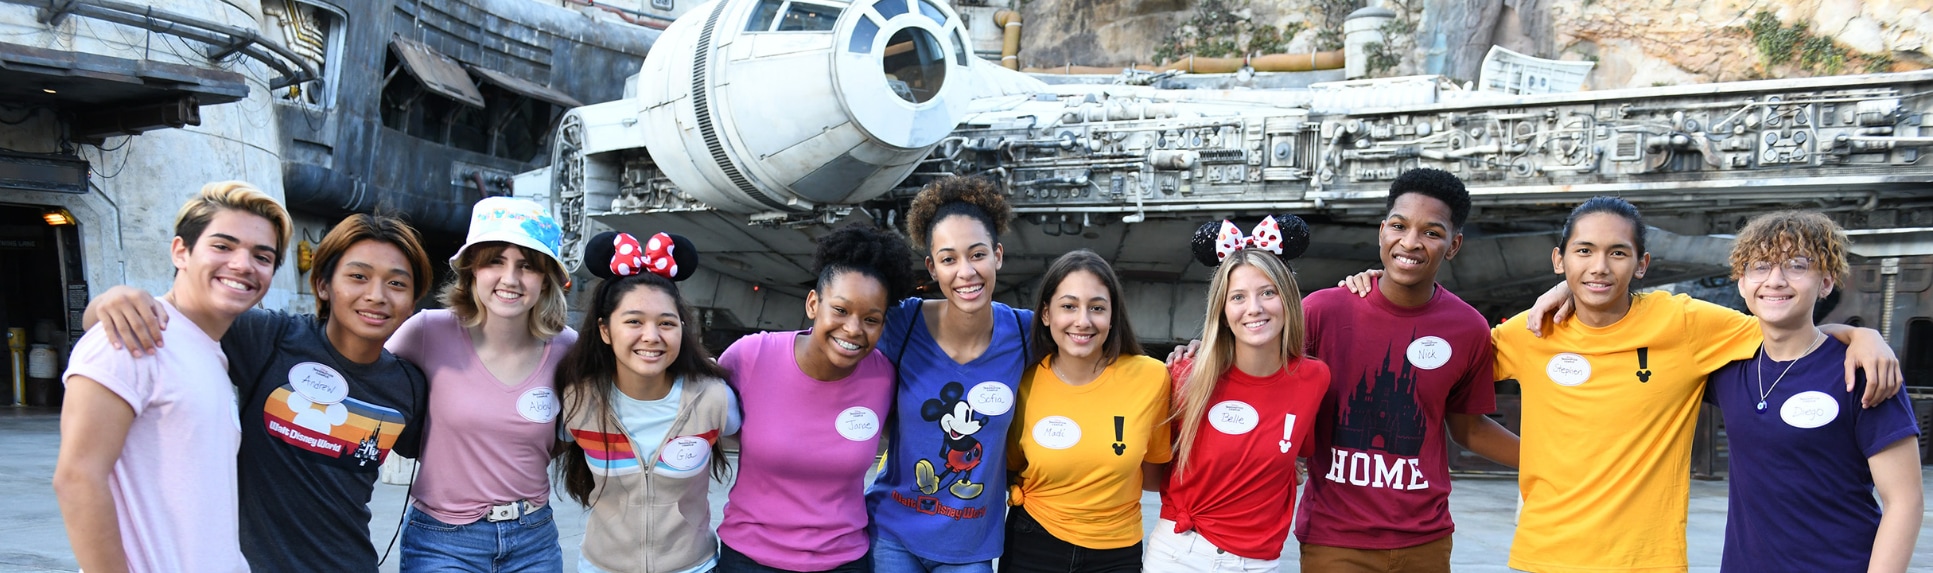 11 Disney Imagination Campus students stand in front of the Millennium Falcon in Star Wars Galaxy’s Edge